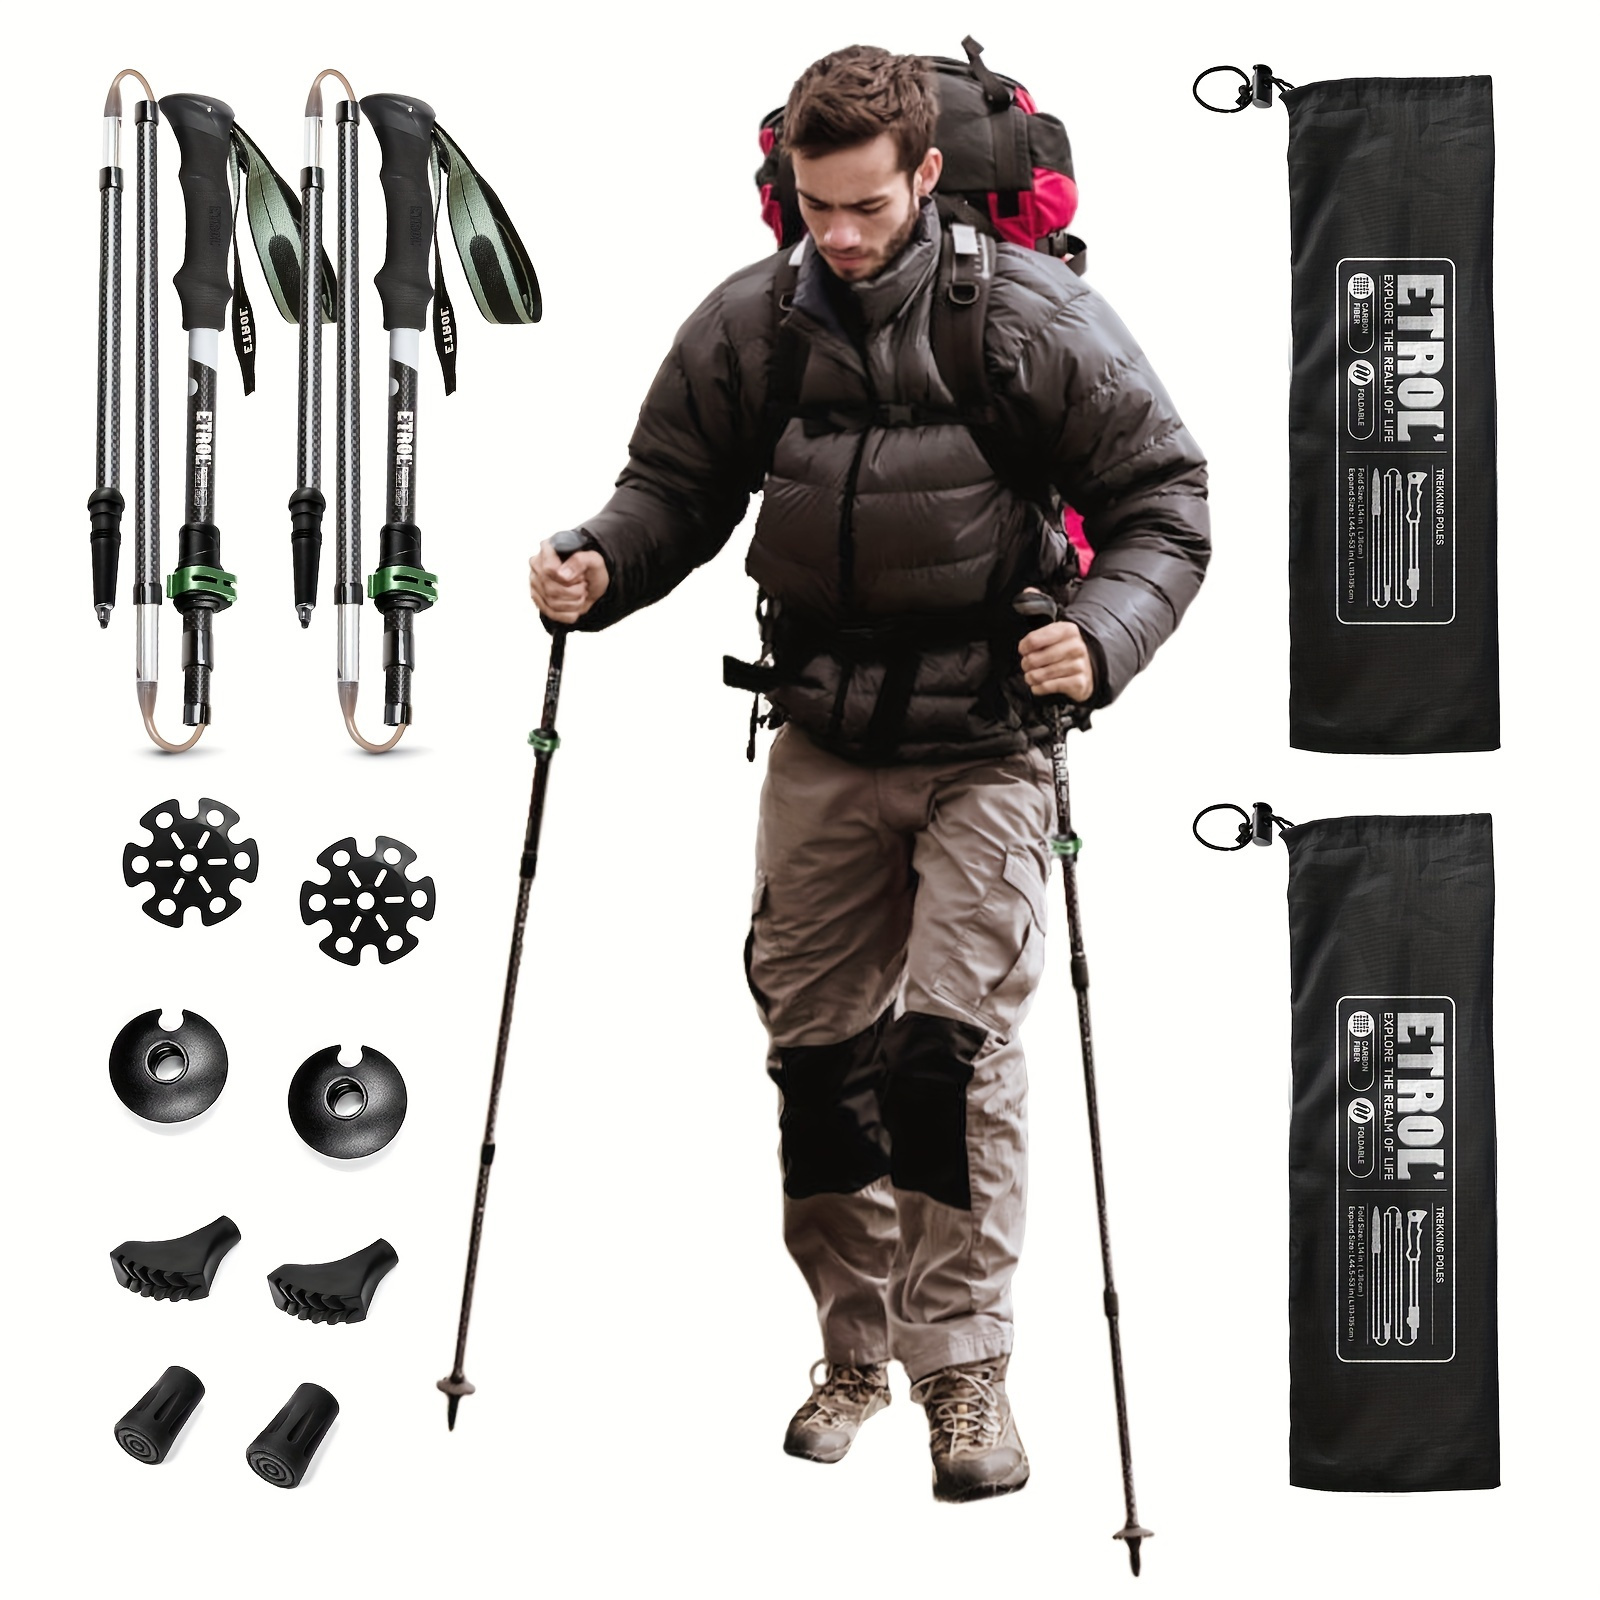 

Etrol Carbon Fiber Trekking Pole - Lightweight, Foldable, And Collapsible For Mountaineering And Backpacking